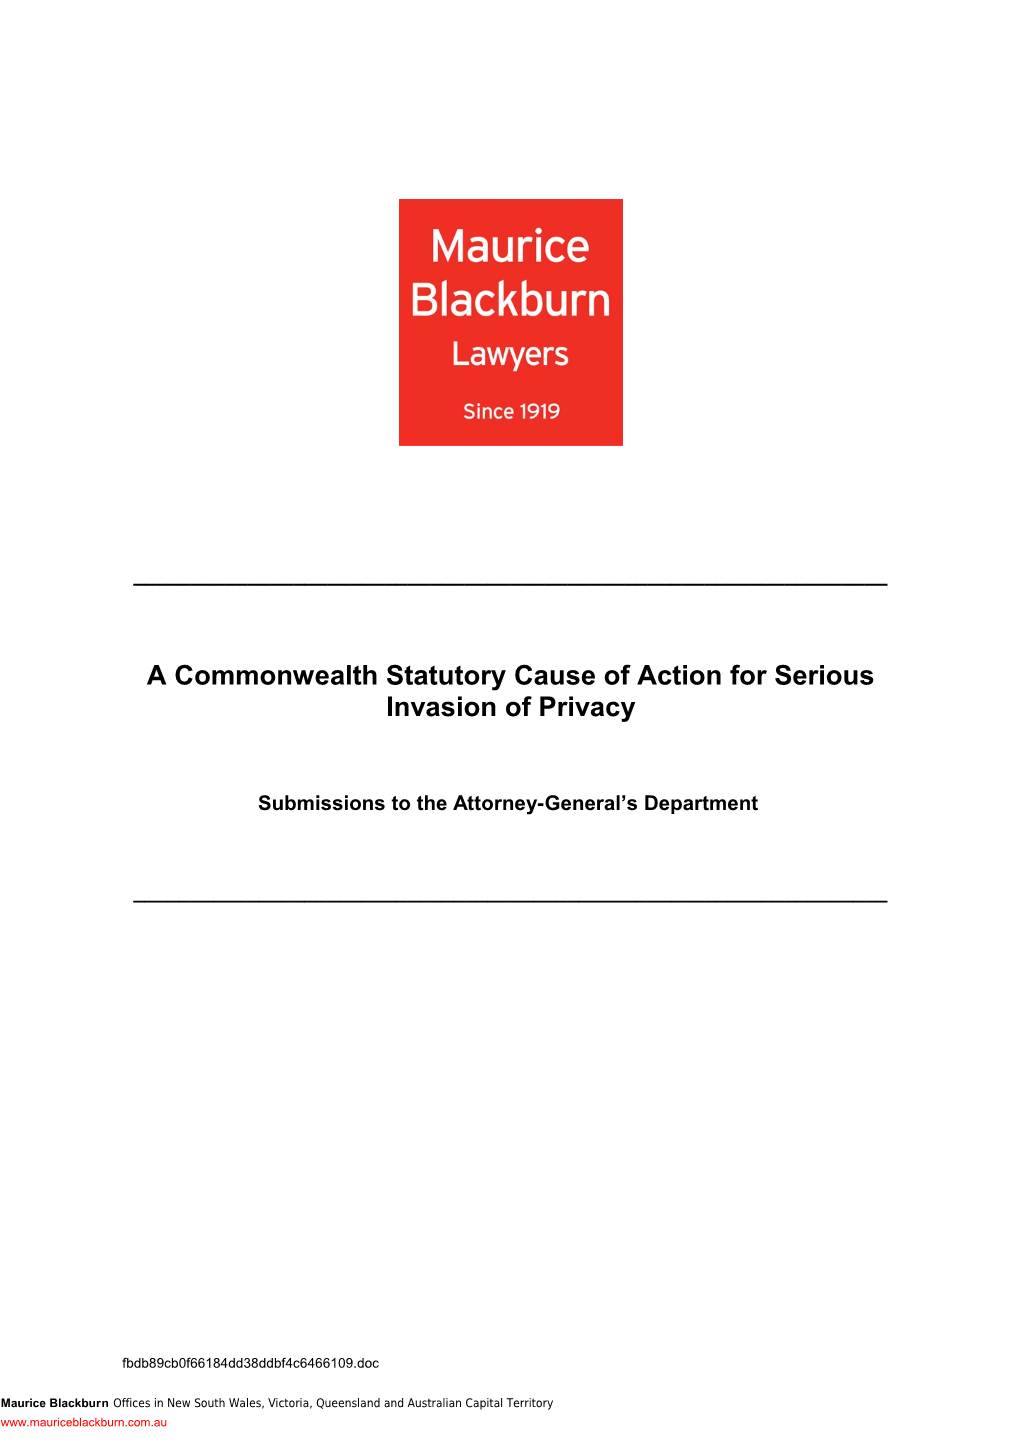 Submission - Right to Sue for Serious Invasion of Personal Privacy - Maurice Blackburn Lawyers